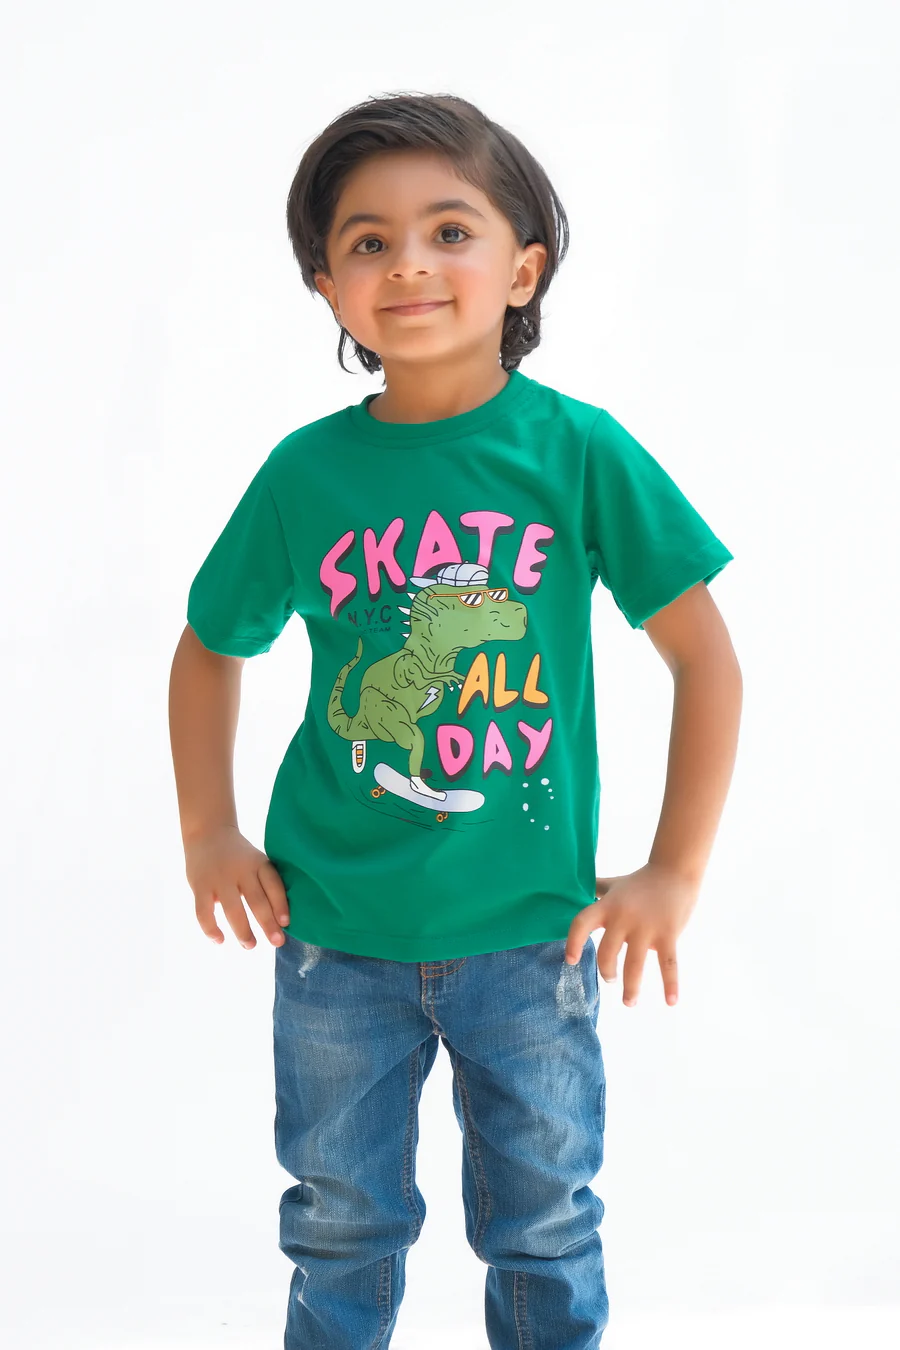 Skate All Day - Half Sleeves T-Shirts For Kids - Green - SBT-340